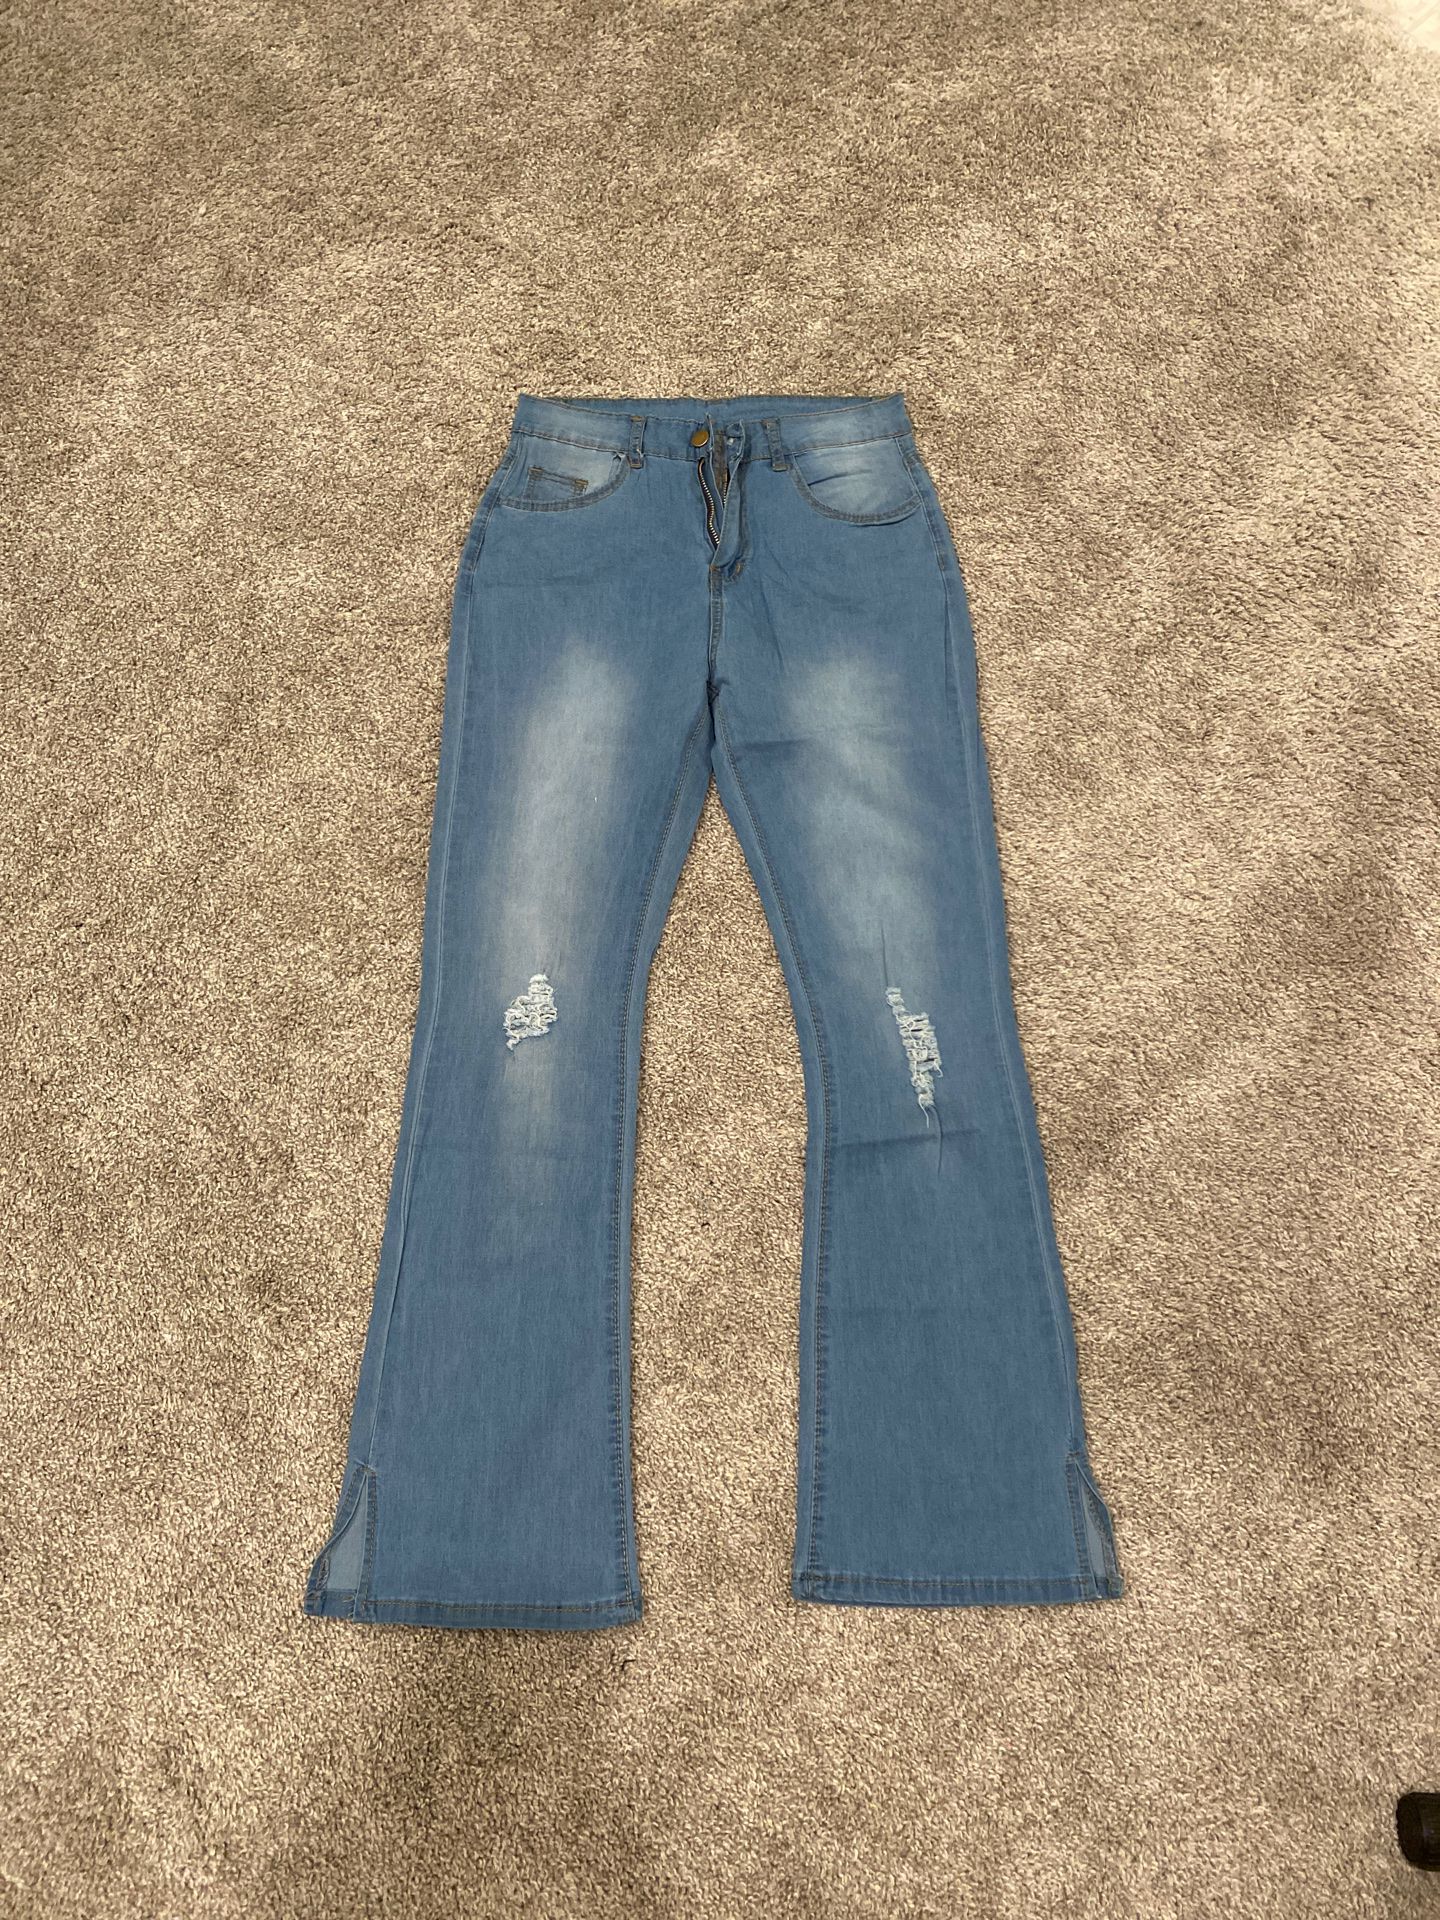 Light washed boot cut jeans, brand new, size small.